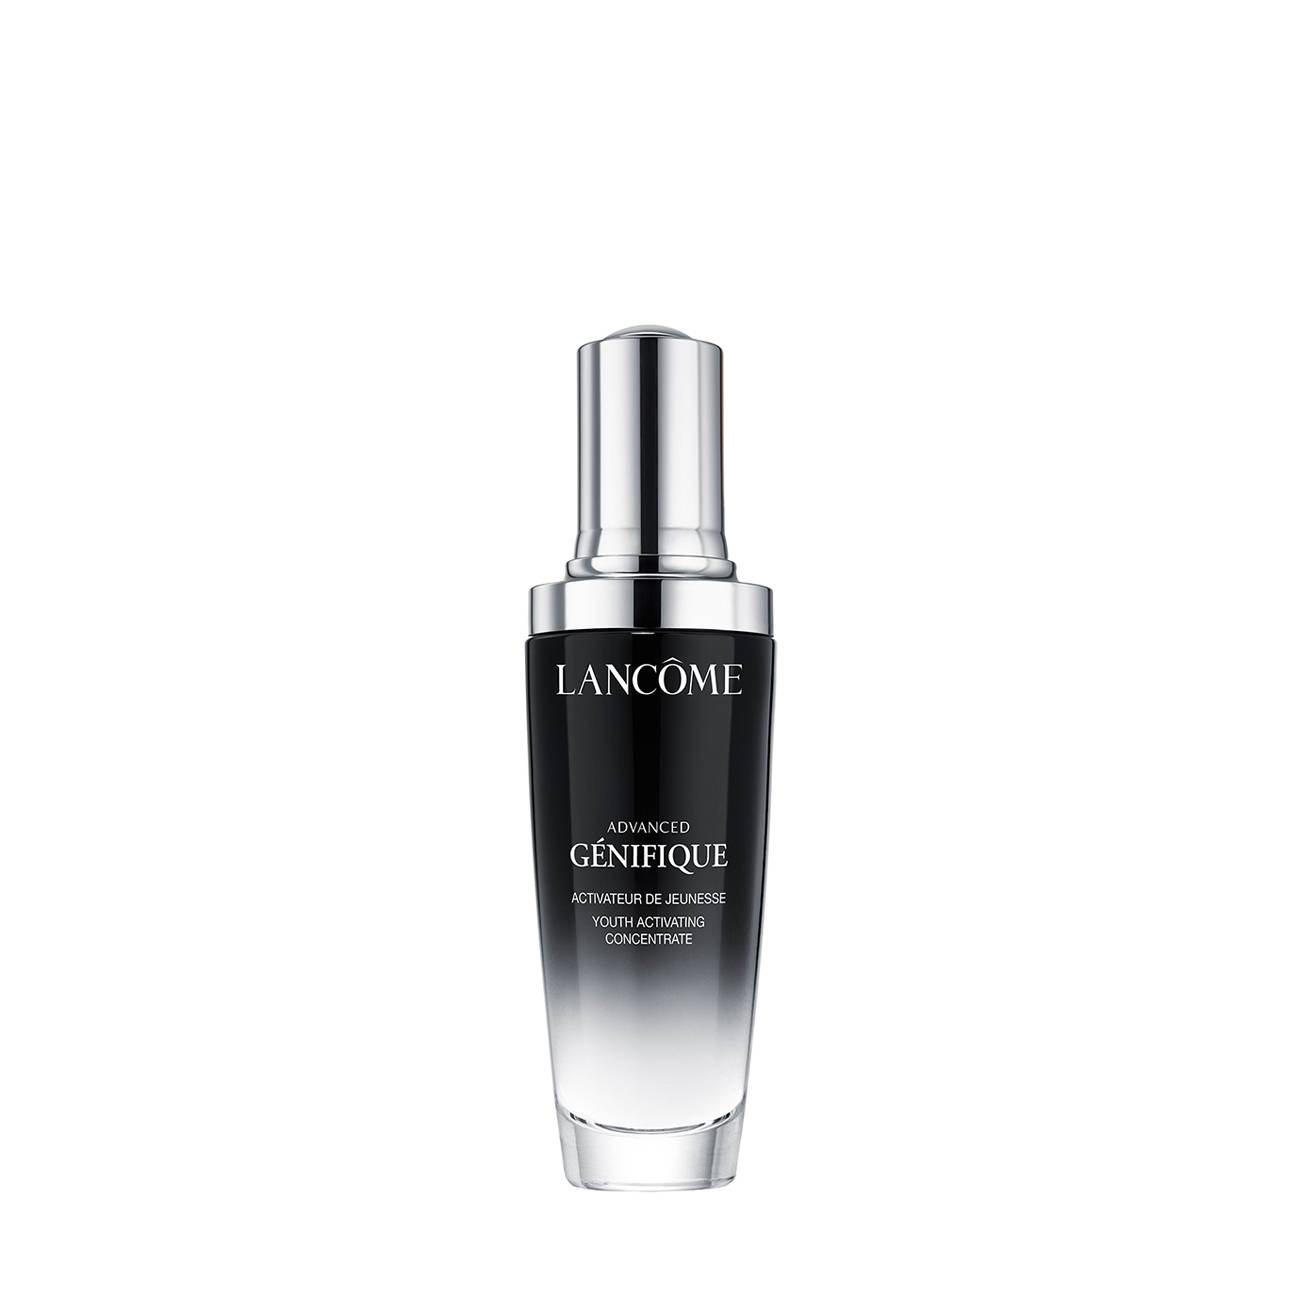 ADVANCED GENIFIQUE YOUTH ACTIVATING CONCENTRATE 50 ml bestvalue